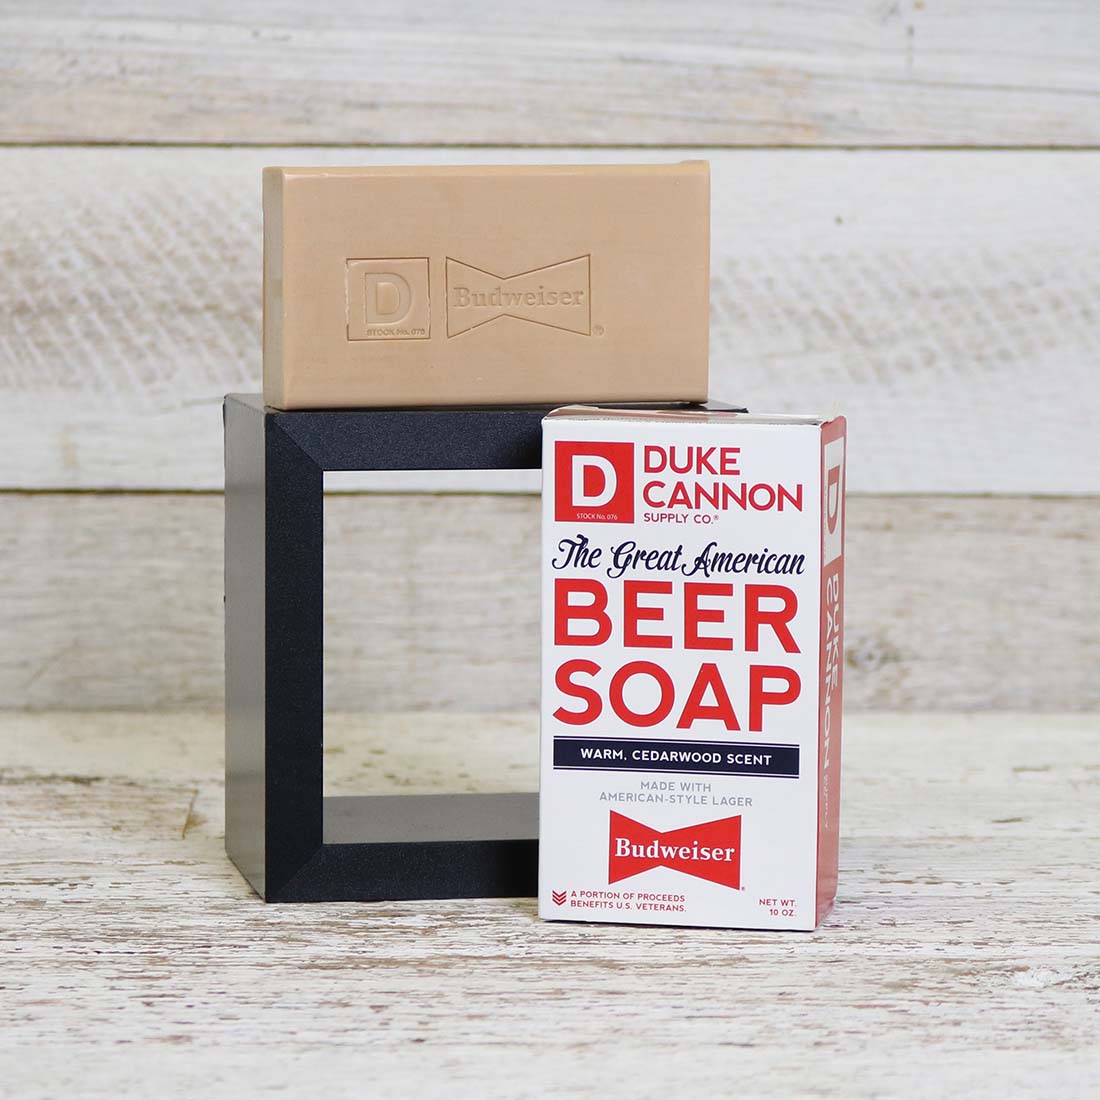 Duke Cannon Budweiser Beer Soap - The Whiskey Cave